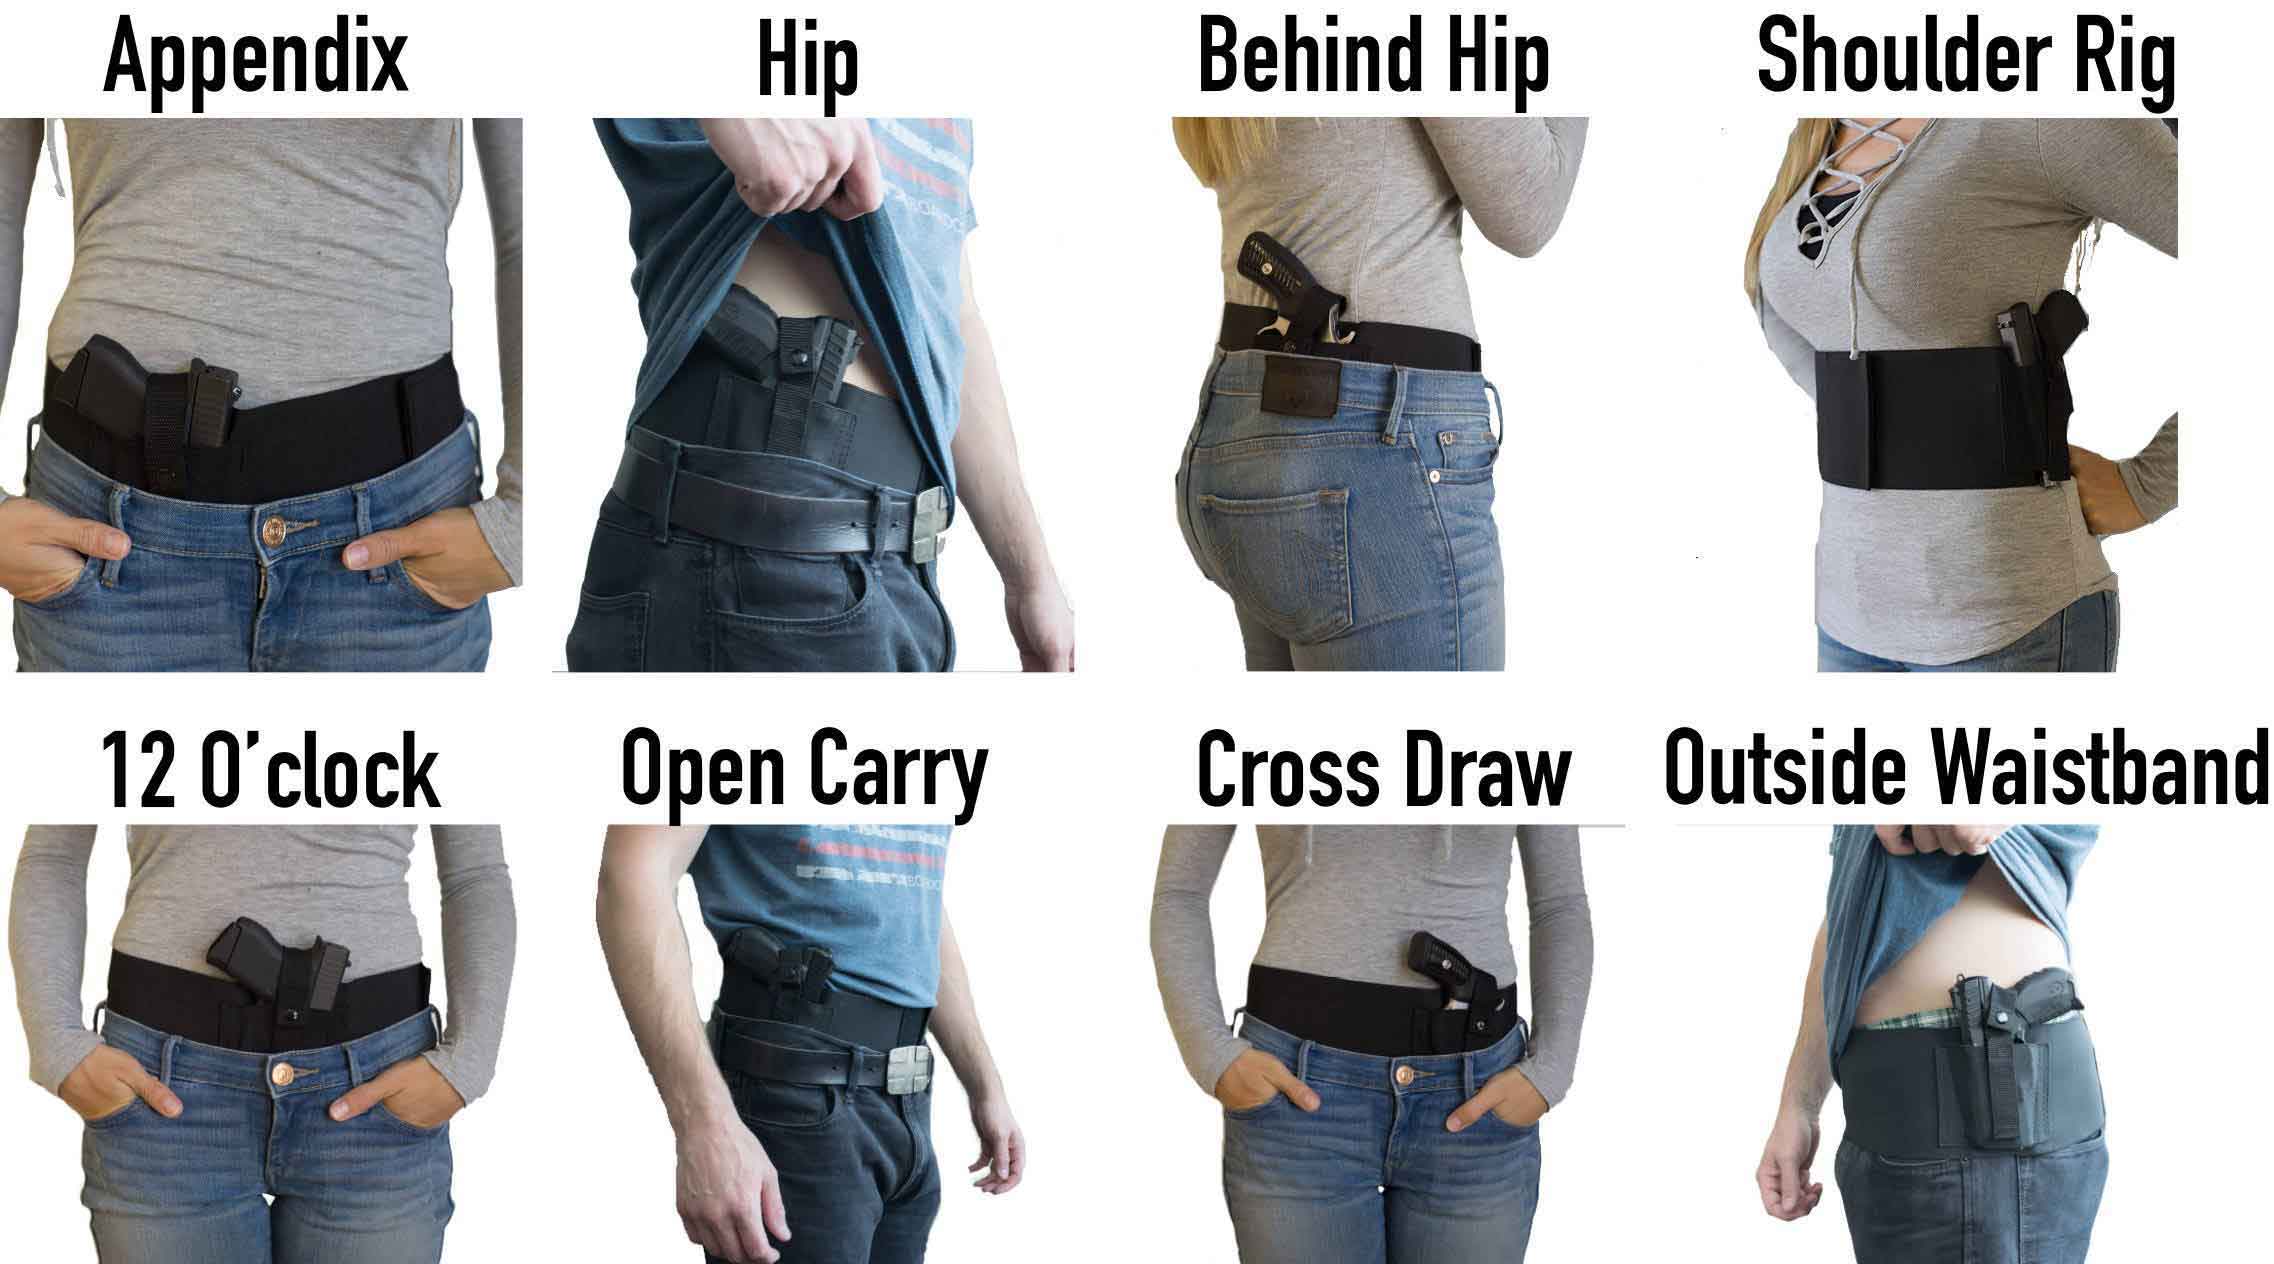 you can wear dragon belly holster appendix, hip, behind hip, soulder rig, 12 o'clock, open carry, cross draw, outside waistband, inside waistband